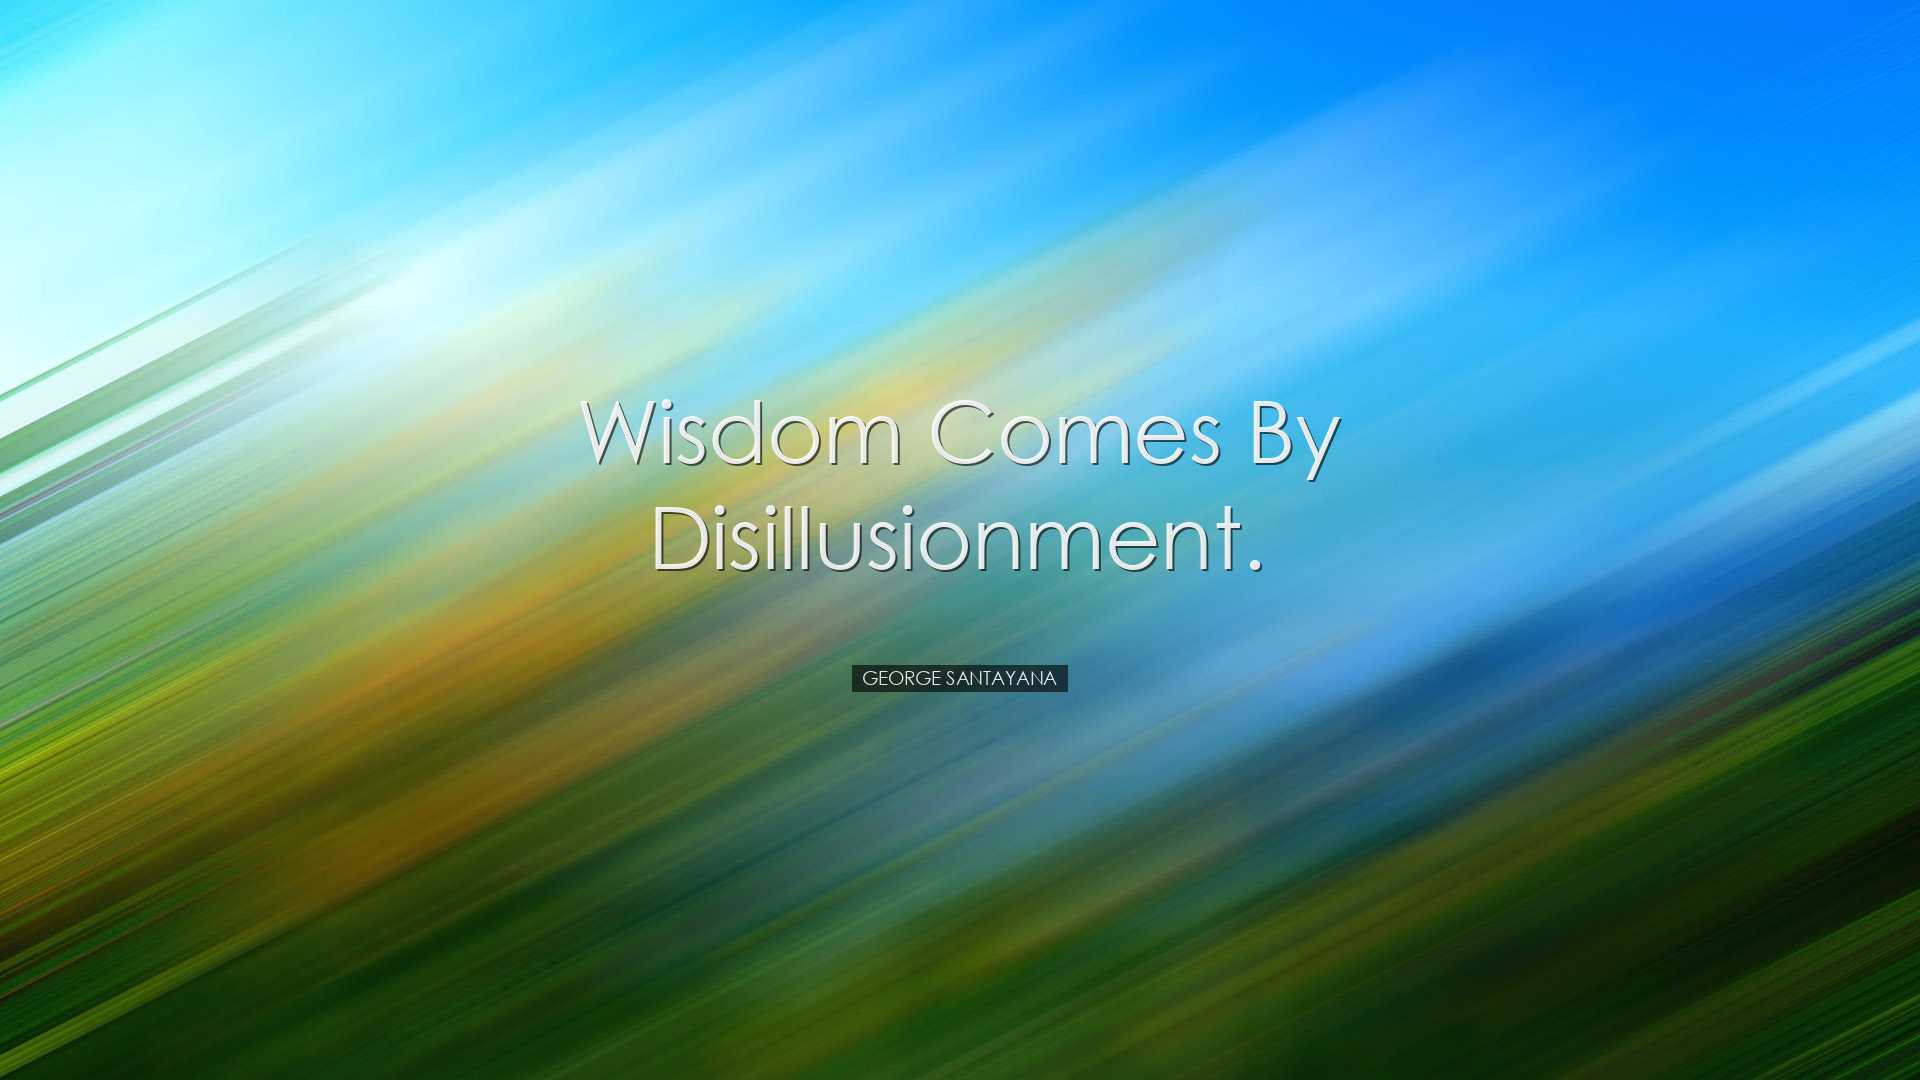 Wisdom comes by disillusionment. - George Santayana